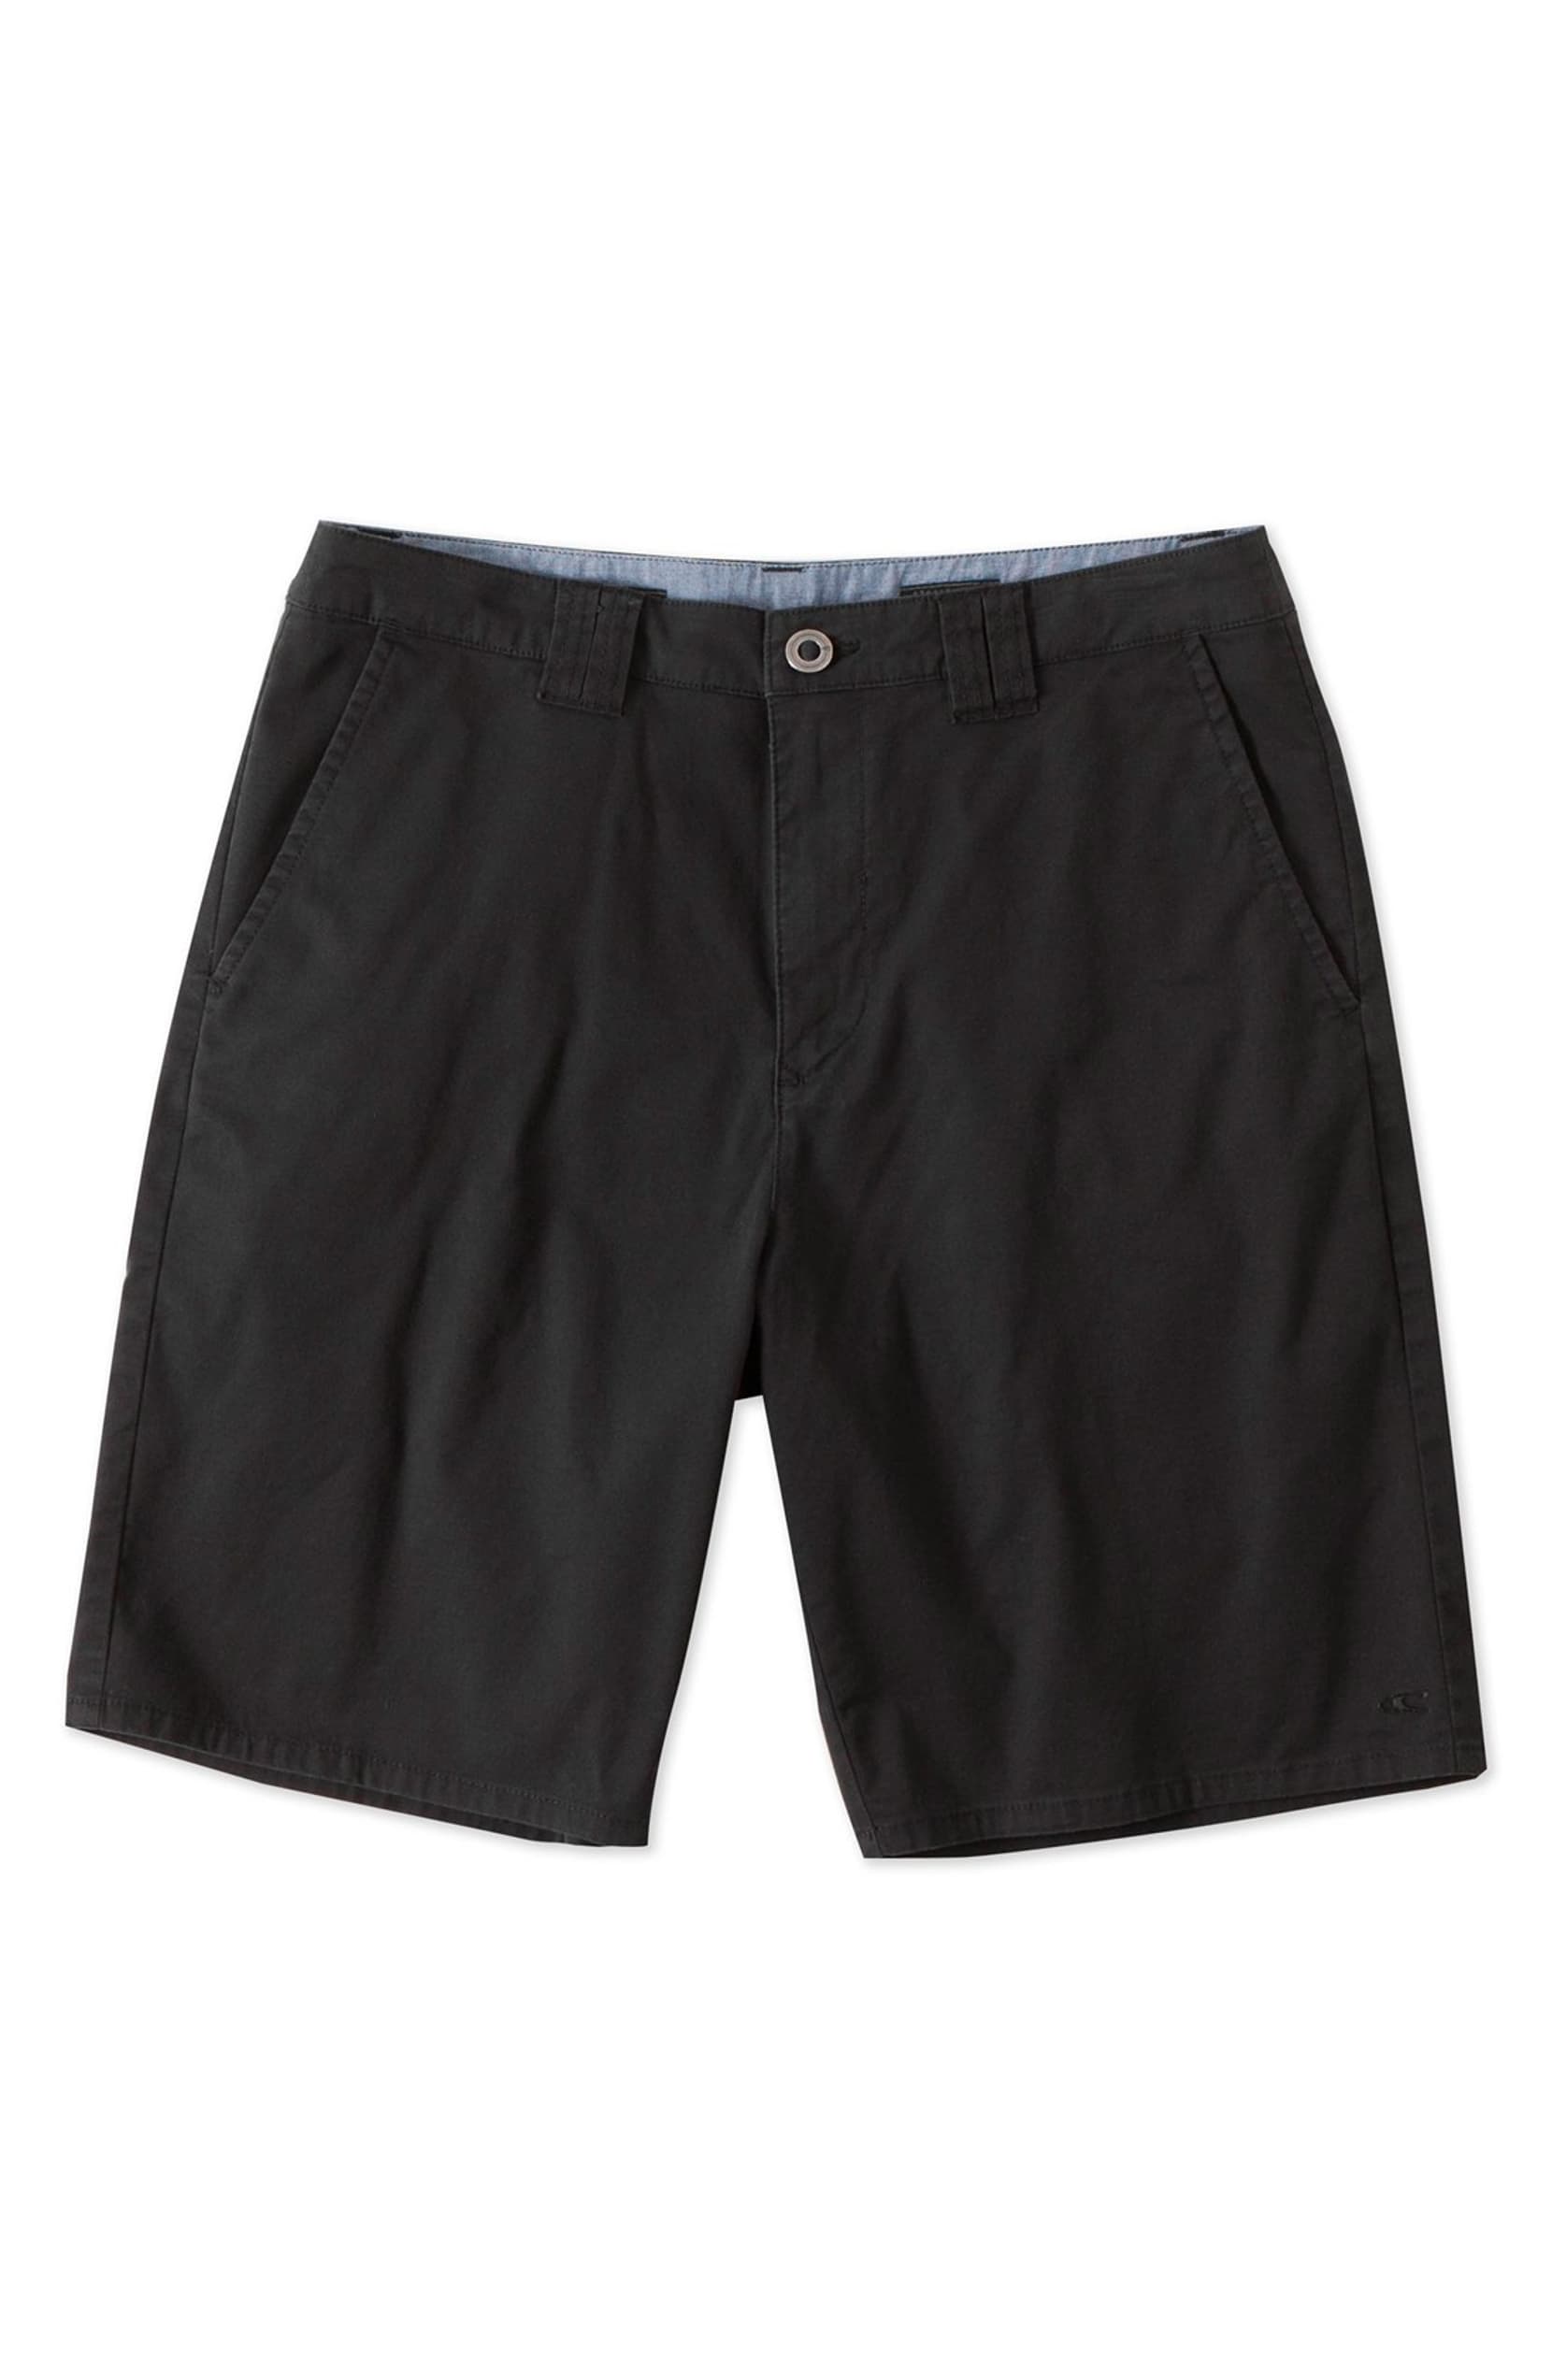 O'neill Contact Youth Short BLK 24